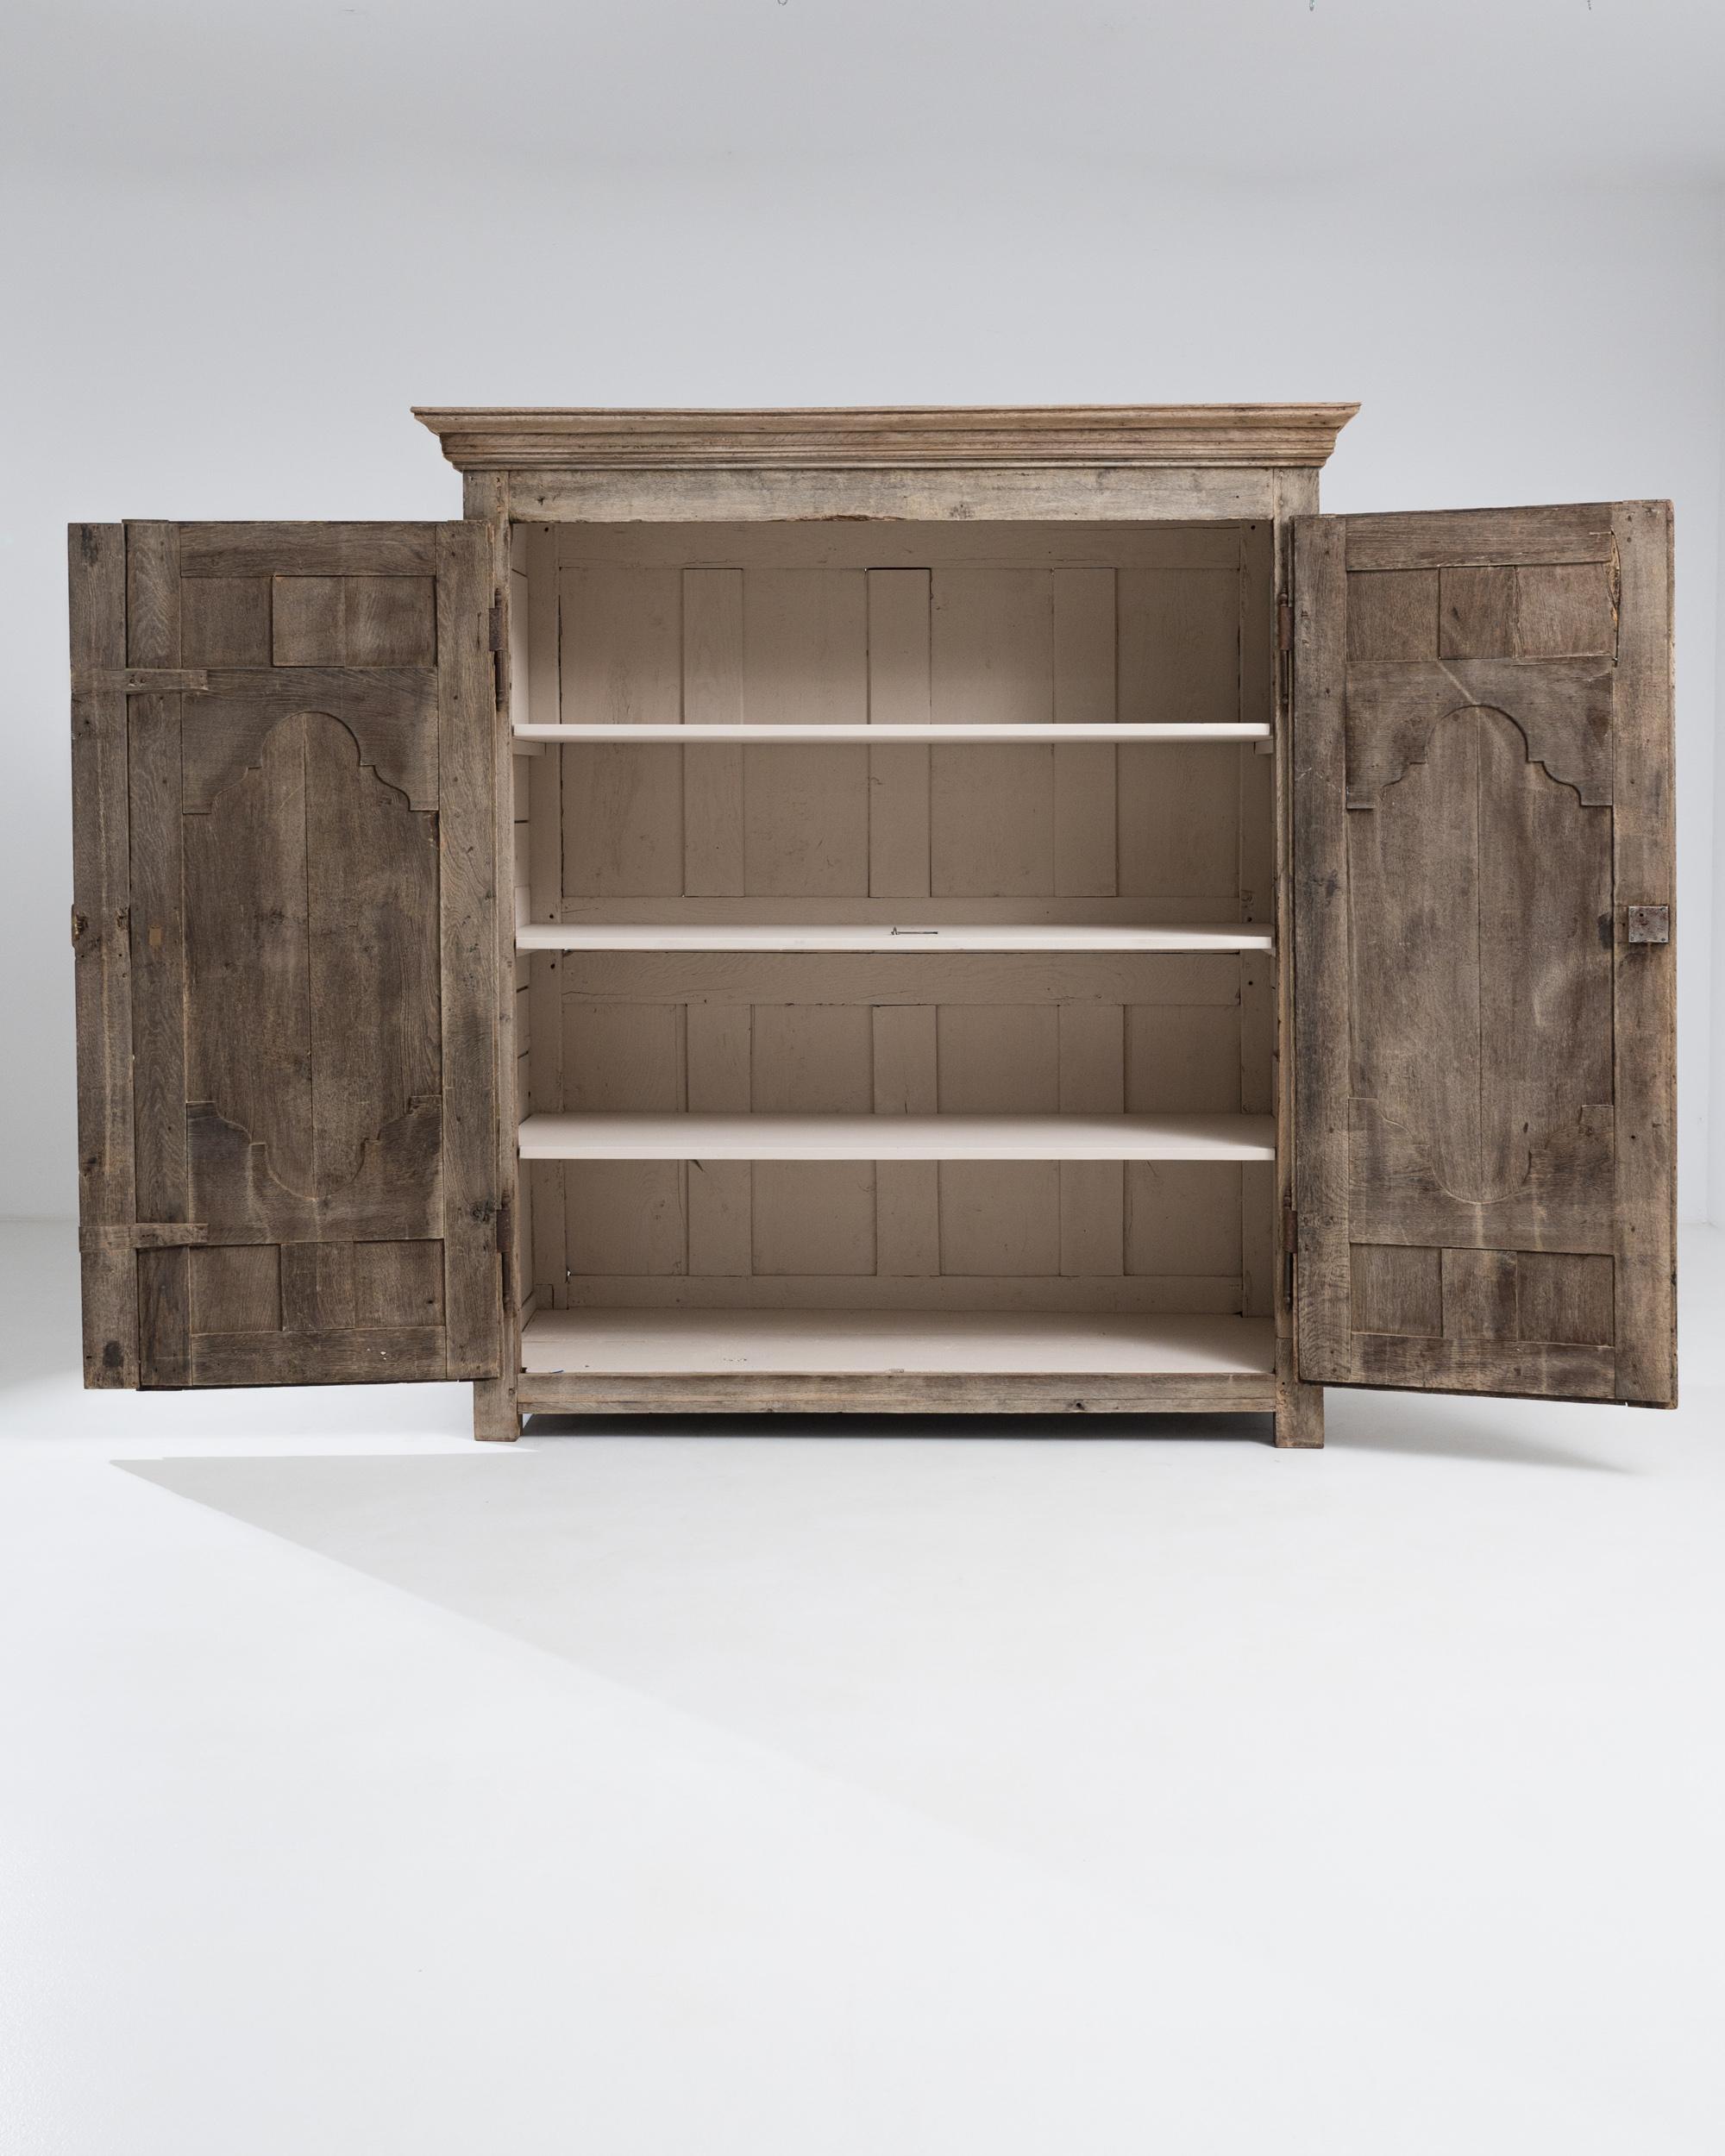 This provincial oak cabinet combines antique grandeur with a simple country charm. Built in France in the 1700s, the warm, sunny tone of the restored oak lends a youthful freshness to the antique frame; the cream-painted shelves of the interior have